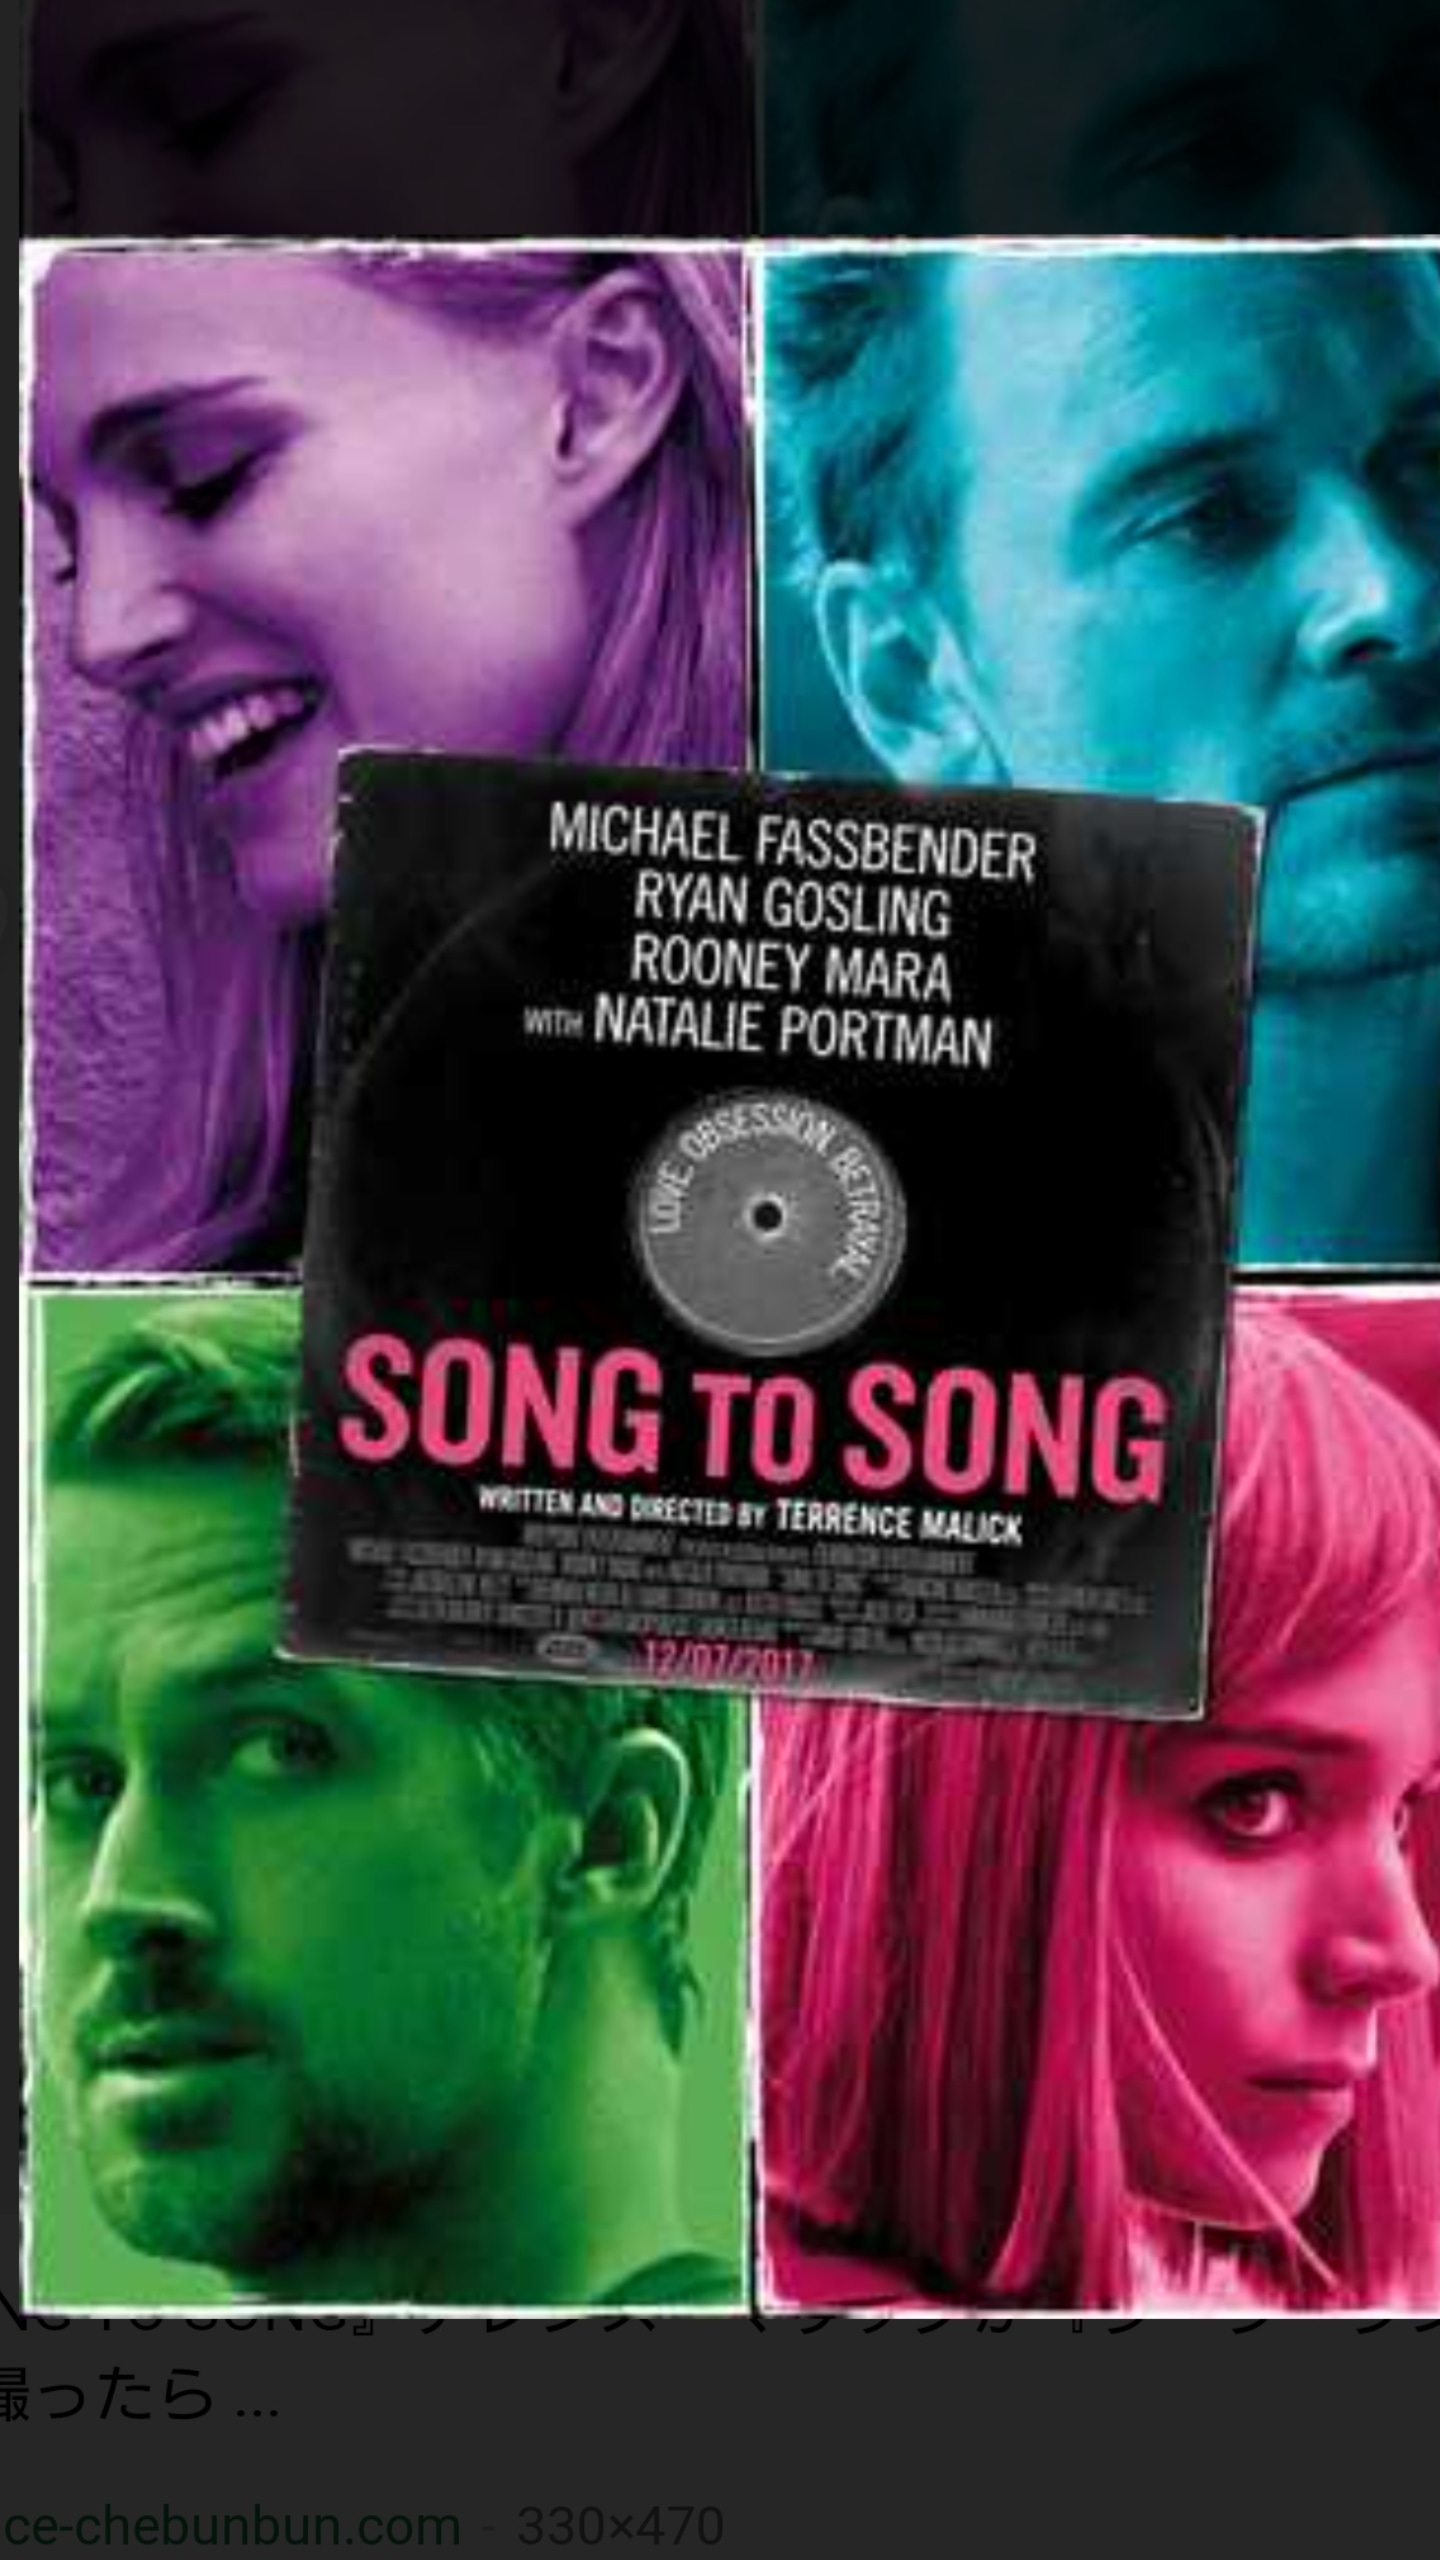 SONG TO SONG♪